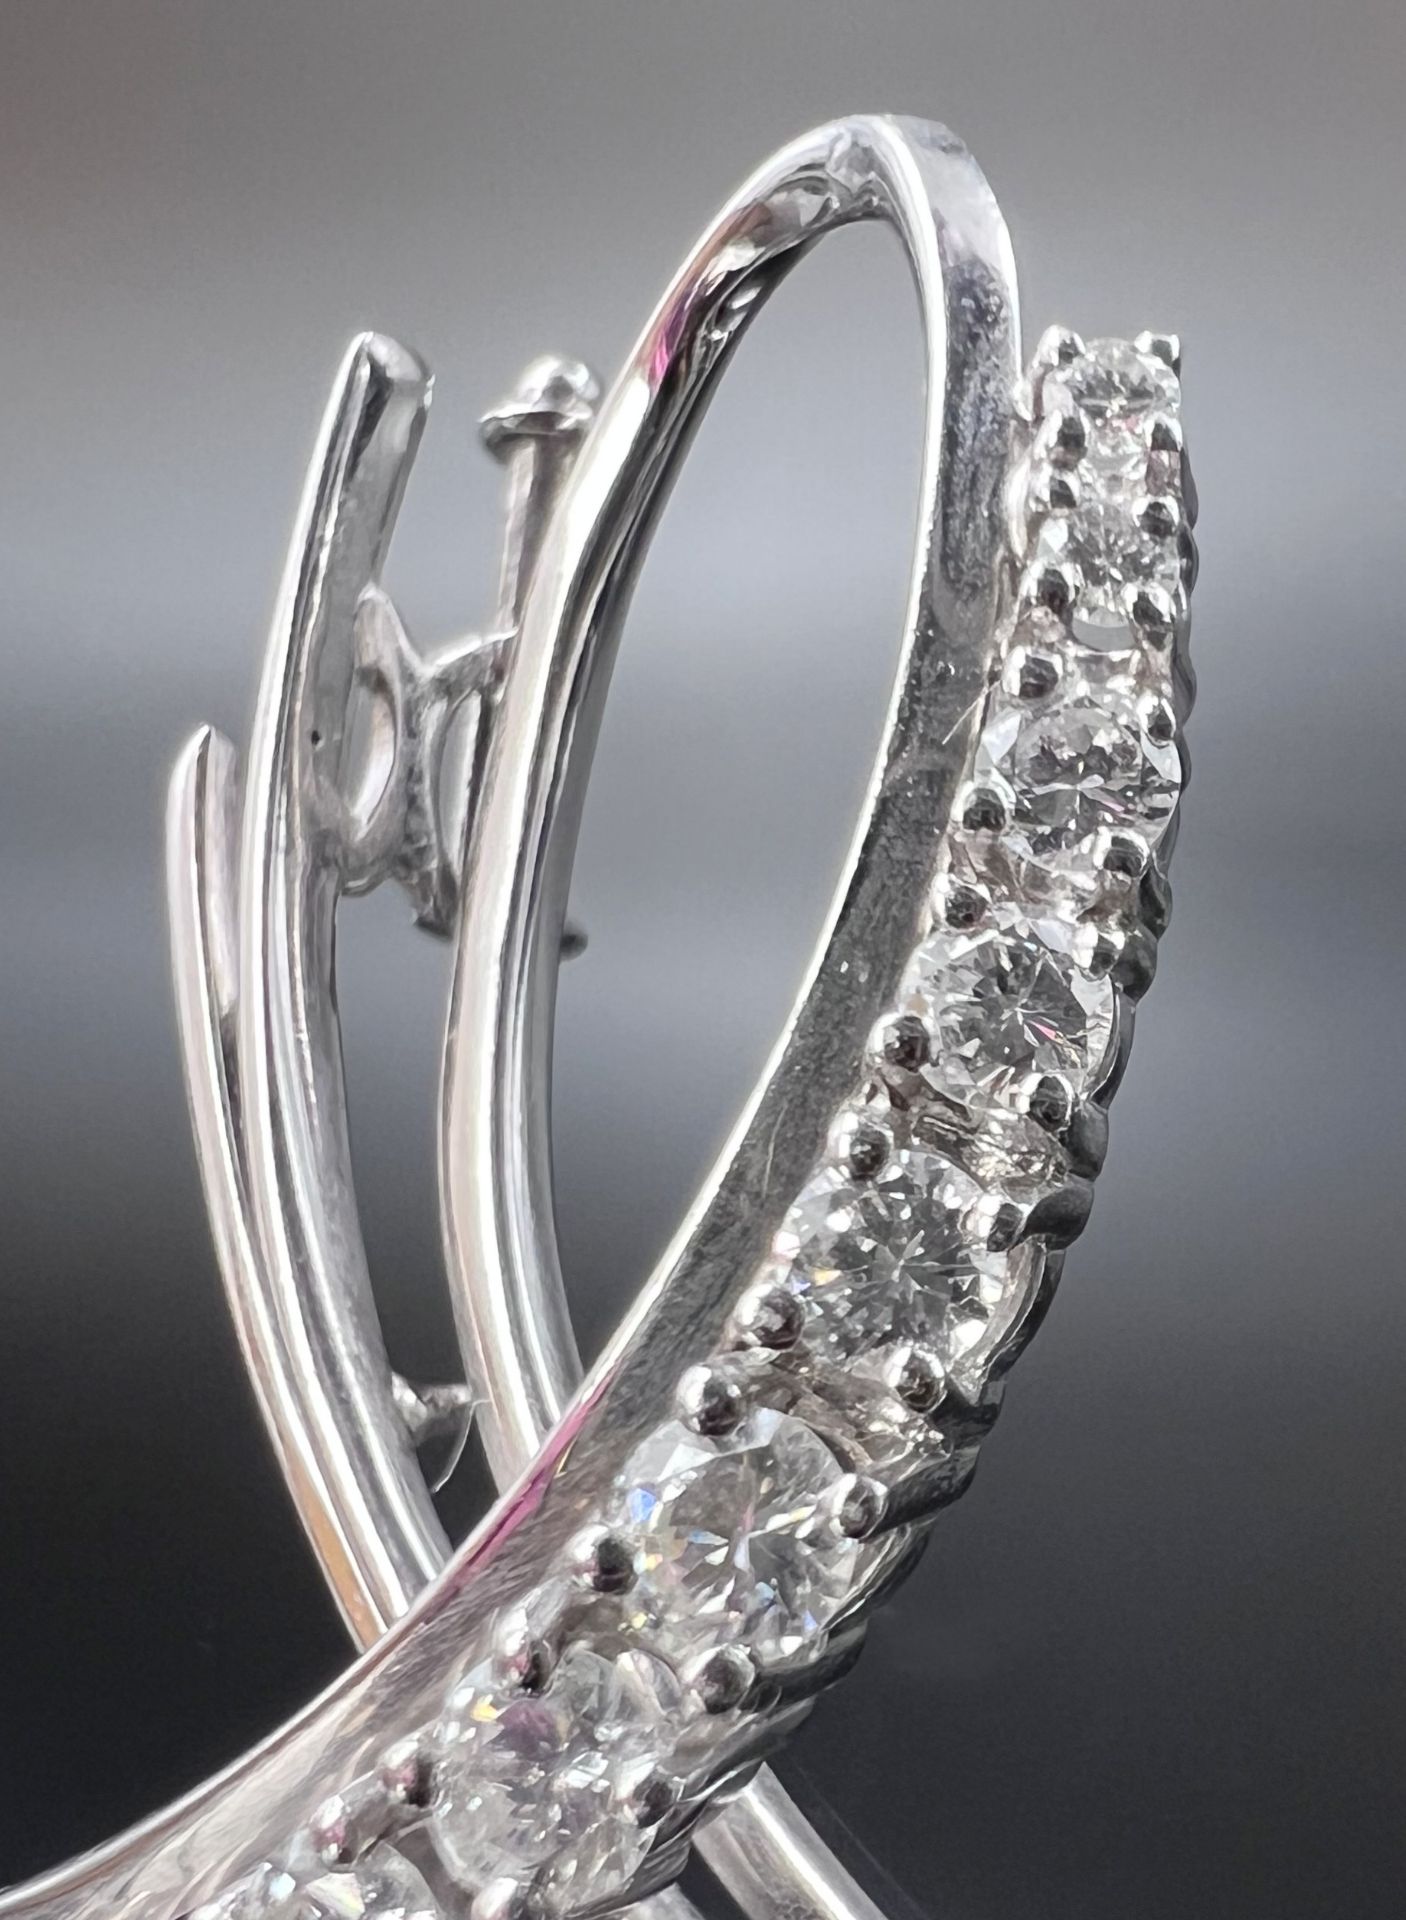 Bow-shaped brooch. 750 white gold set with diamonds. - Image 2 of 5